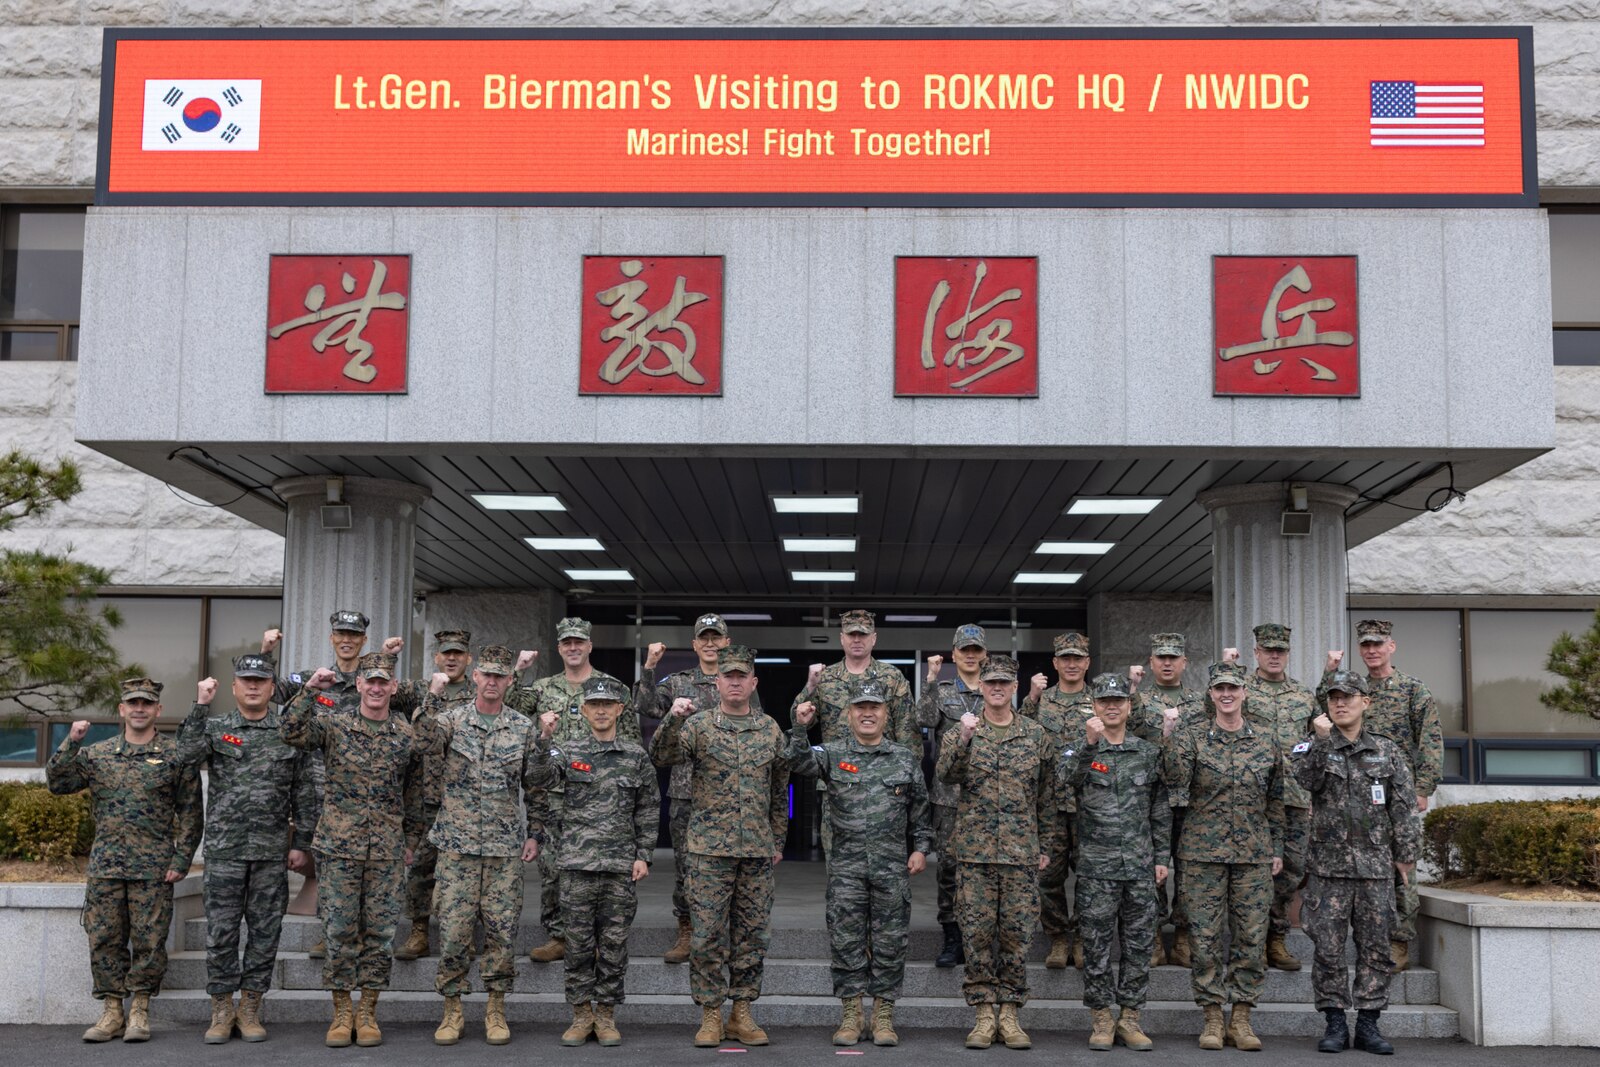 U.S. Marine Corps Lt. Gen James W. Bierman, commanding general of III Marine Expeditionary Force, center-left, and Republic of Korea Marine Corps Commandant Lt. Gen. Kim Kye-Hwan, center-right, stand with their combined staff at the ROK Marine Corps Headquarters, Baran, Republic of Korea, March 9, 2023. The two Marine Corps leaders met to discuss the expansion of combined-joint training on the Korean peninsula and promote mutual commitment between the two forces. The ROK-U.S. alliance is vital to the collective defense and security of the Korean Peninsula and the region, and the lynchpin of U.S. joint force posture in Northeast Asia. (U.S. Marine Corps photo by Lance Cpl. Tyler Andrews)